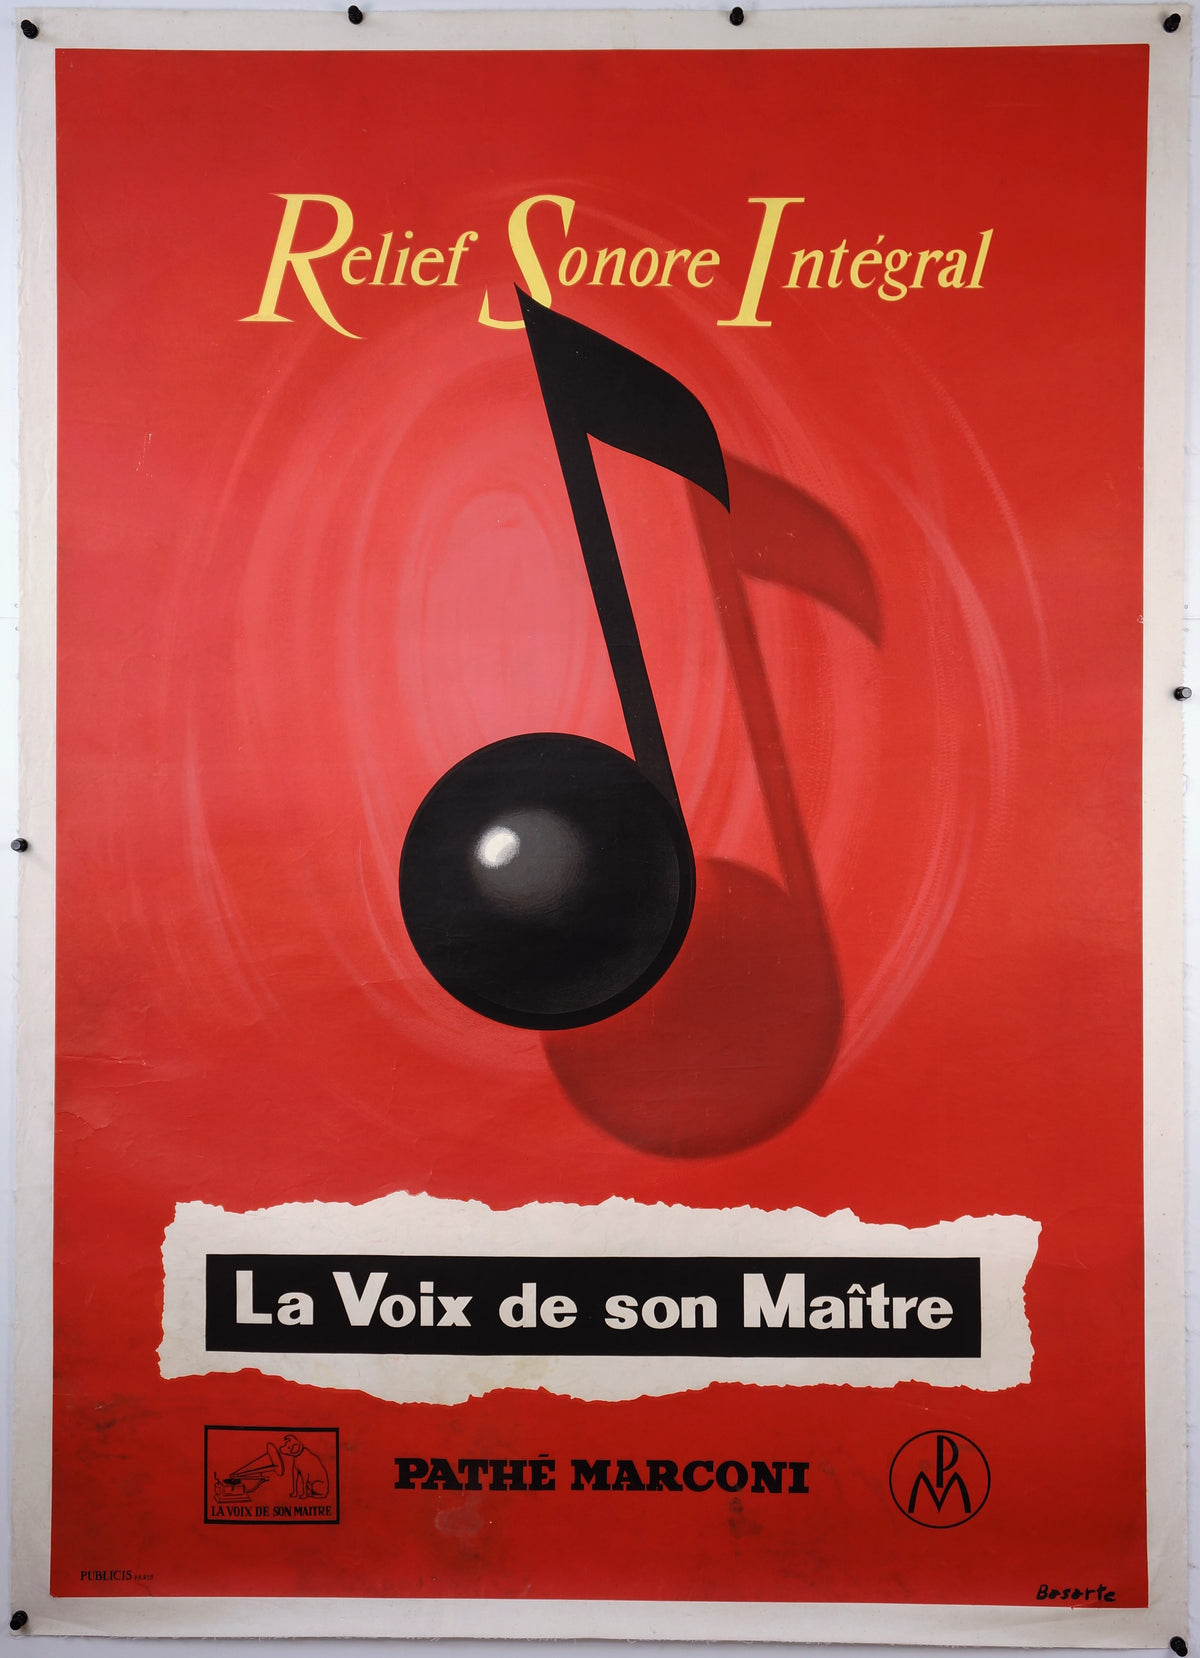 Relief Sonore Integral - Authentic Vintage Poster